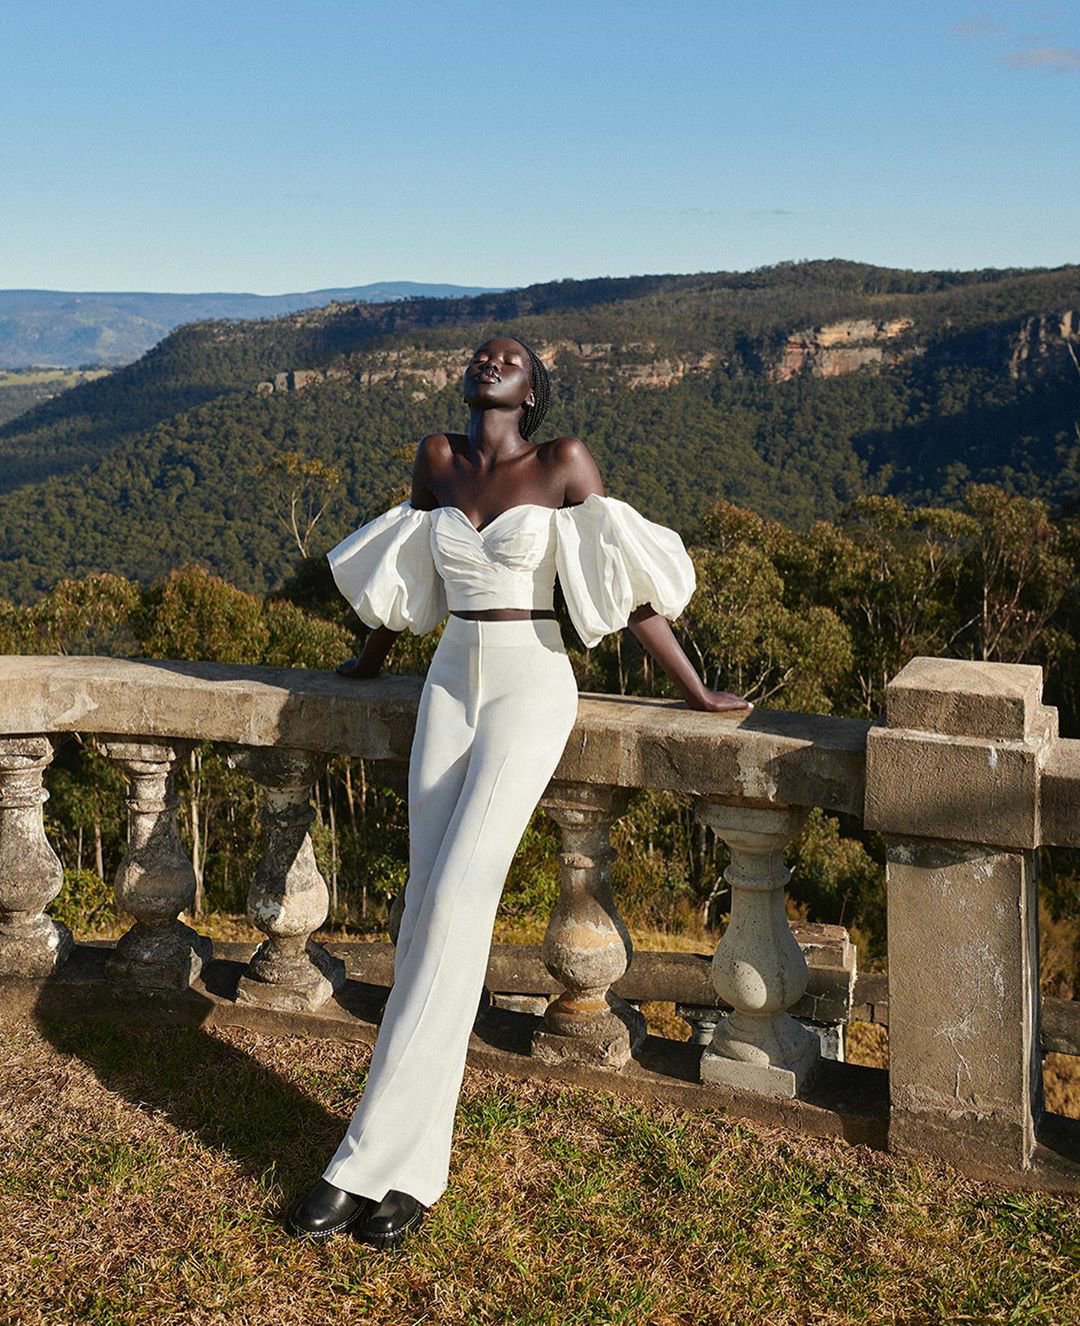 5adut akech shines in david jones spring 2020 campaign proves she looks good in everything6624309403855850579